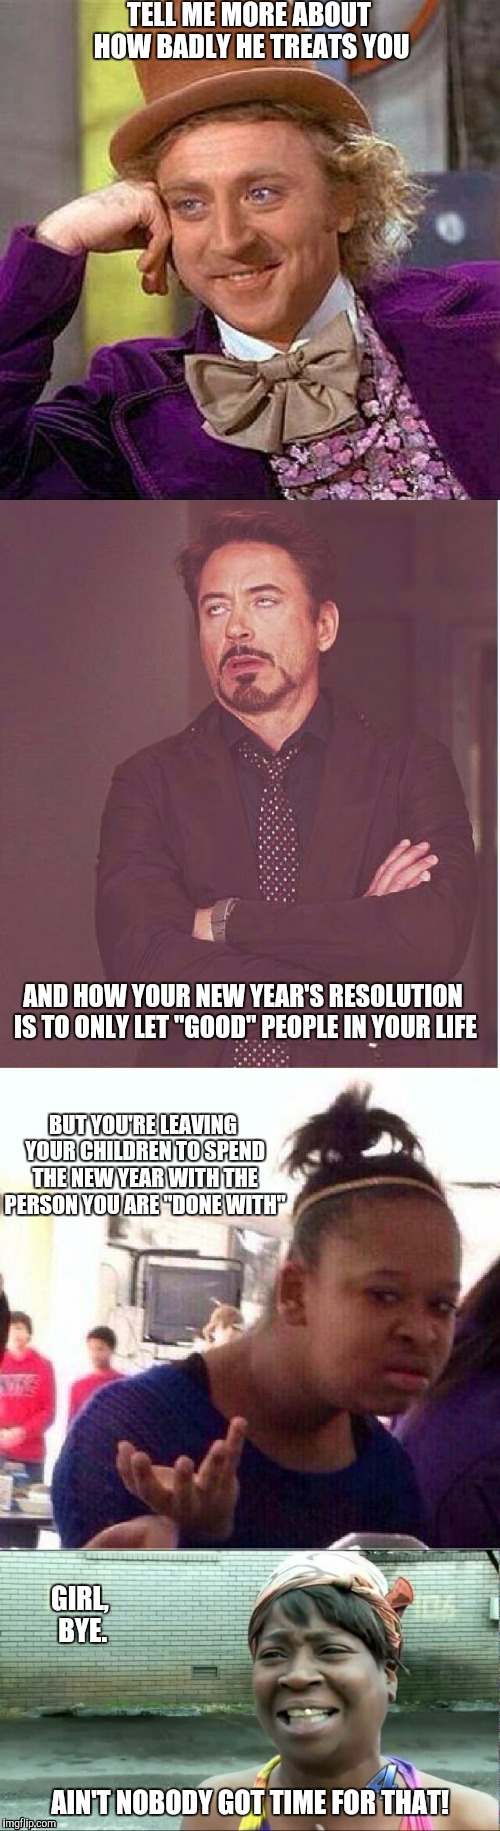 Yeah, had to vent through  several memes. | TELL ME MORE ABOUT HOW BADLY HE TREATS YOU AND HOW YOUR NEW YEAR'S RESOLUTION IS TO ONLY LET "GOOD" PEOPLE IN YOUR LIFE BUT YOU'RE LEAVING Y | image tagged in black girl wat,sweet brown,creepy condescending wonka,robert downey jr,aint nobody got time for that,face you make robert downey | made w/ Imgflip meme maker